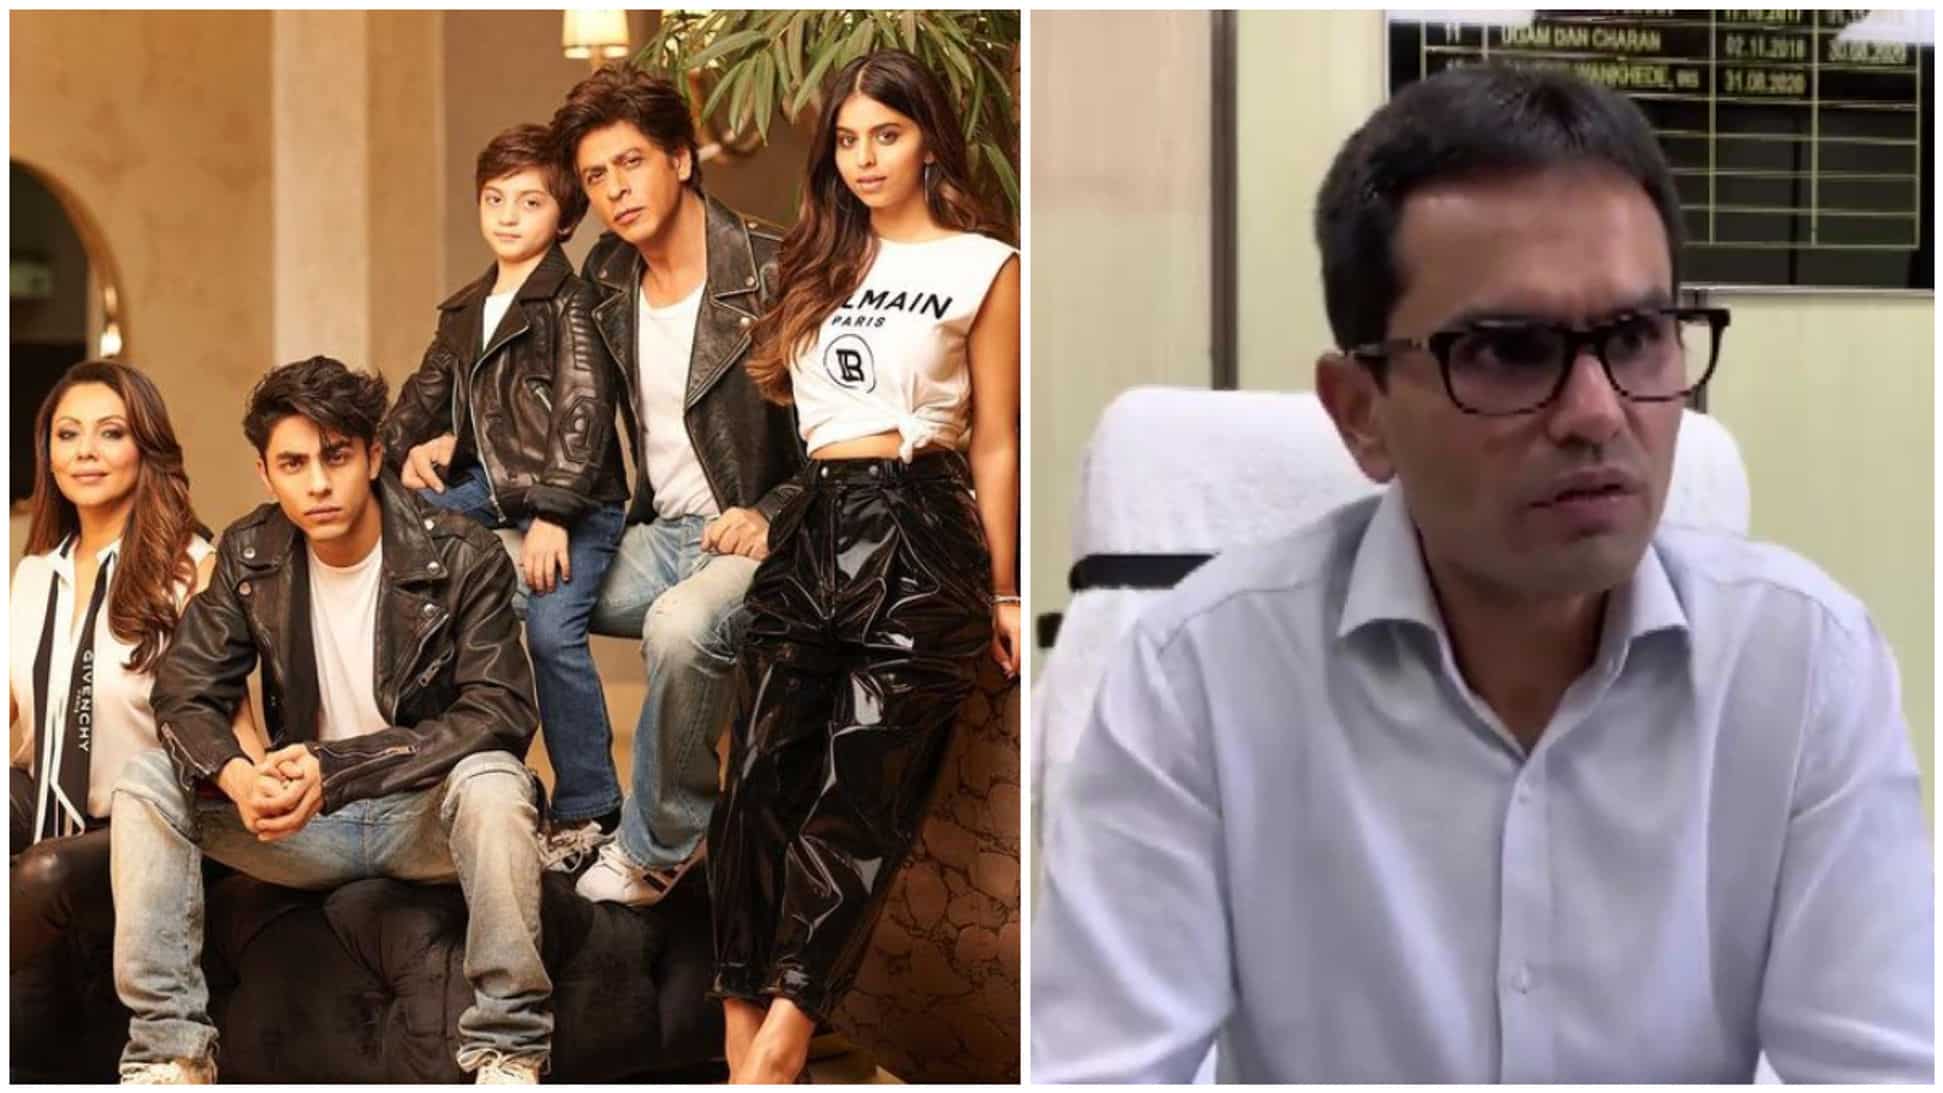 https://www.mobilemasala.com/film-gossip/Aryan-Khan-drugs-on-cruise-case-Sameer-Wankhede-moves-High-Court-to-quash-ED-charges-against-him-over-celebritys-arrest-i213911